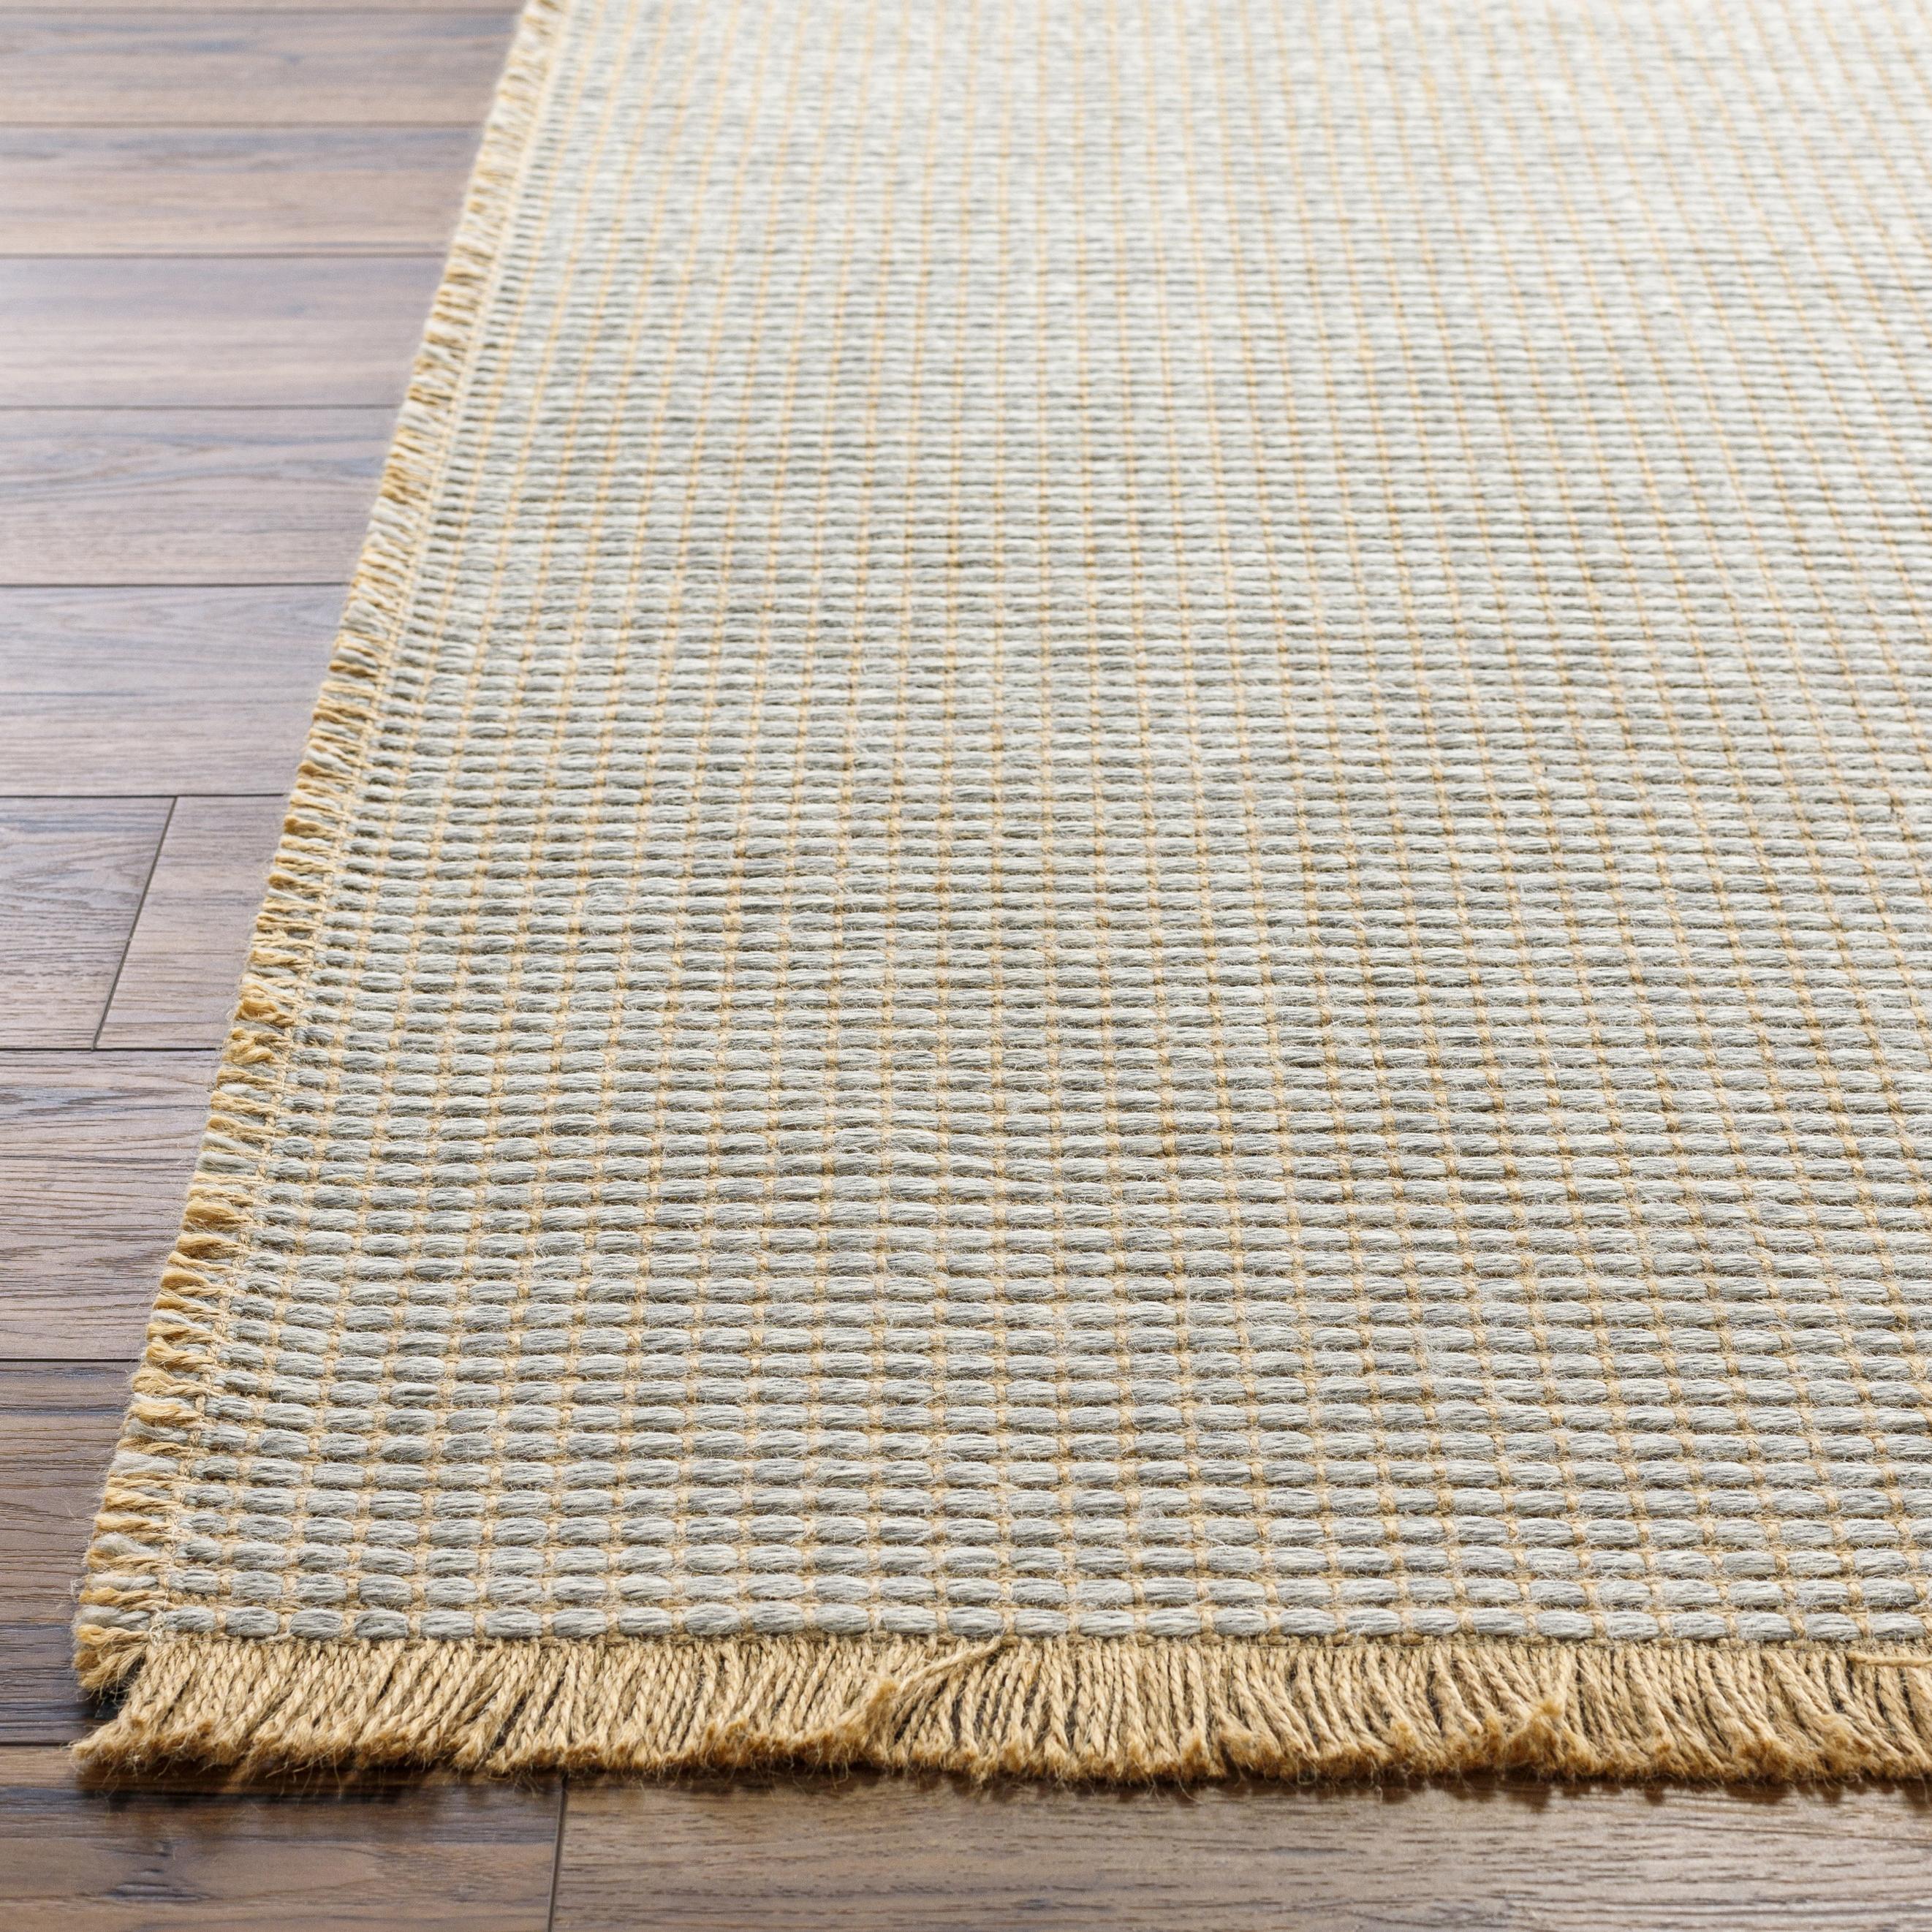 Introducing the Kimi area rug! This stunning and unique piece of art was designed in collaboration between Surya and Becki Owens, two creative minds coming together to create something special. The Kimi rug features a beautiful stitched design, with a textural woven pattern and self tassels that make it a one-of-a-kind addition to any space. Amethyst Home provides interior design, new home construction design consulting, vintage area rugs, and lighting in the Winter Garden metro area.